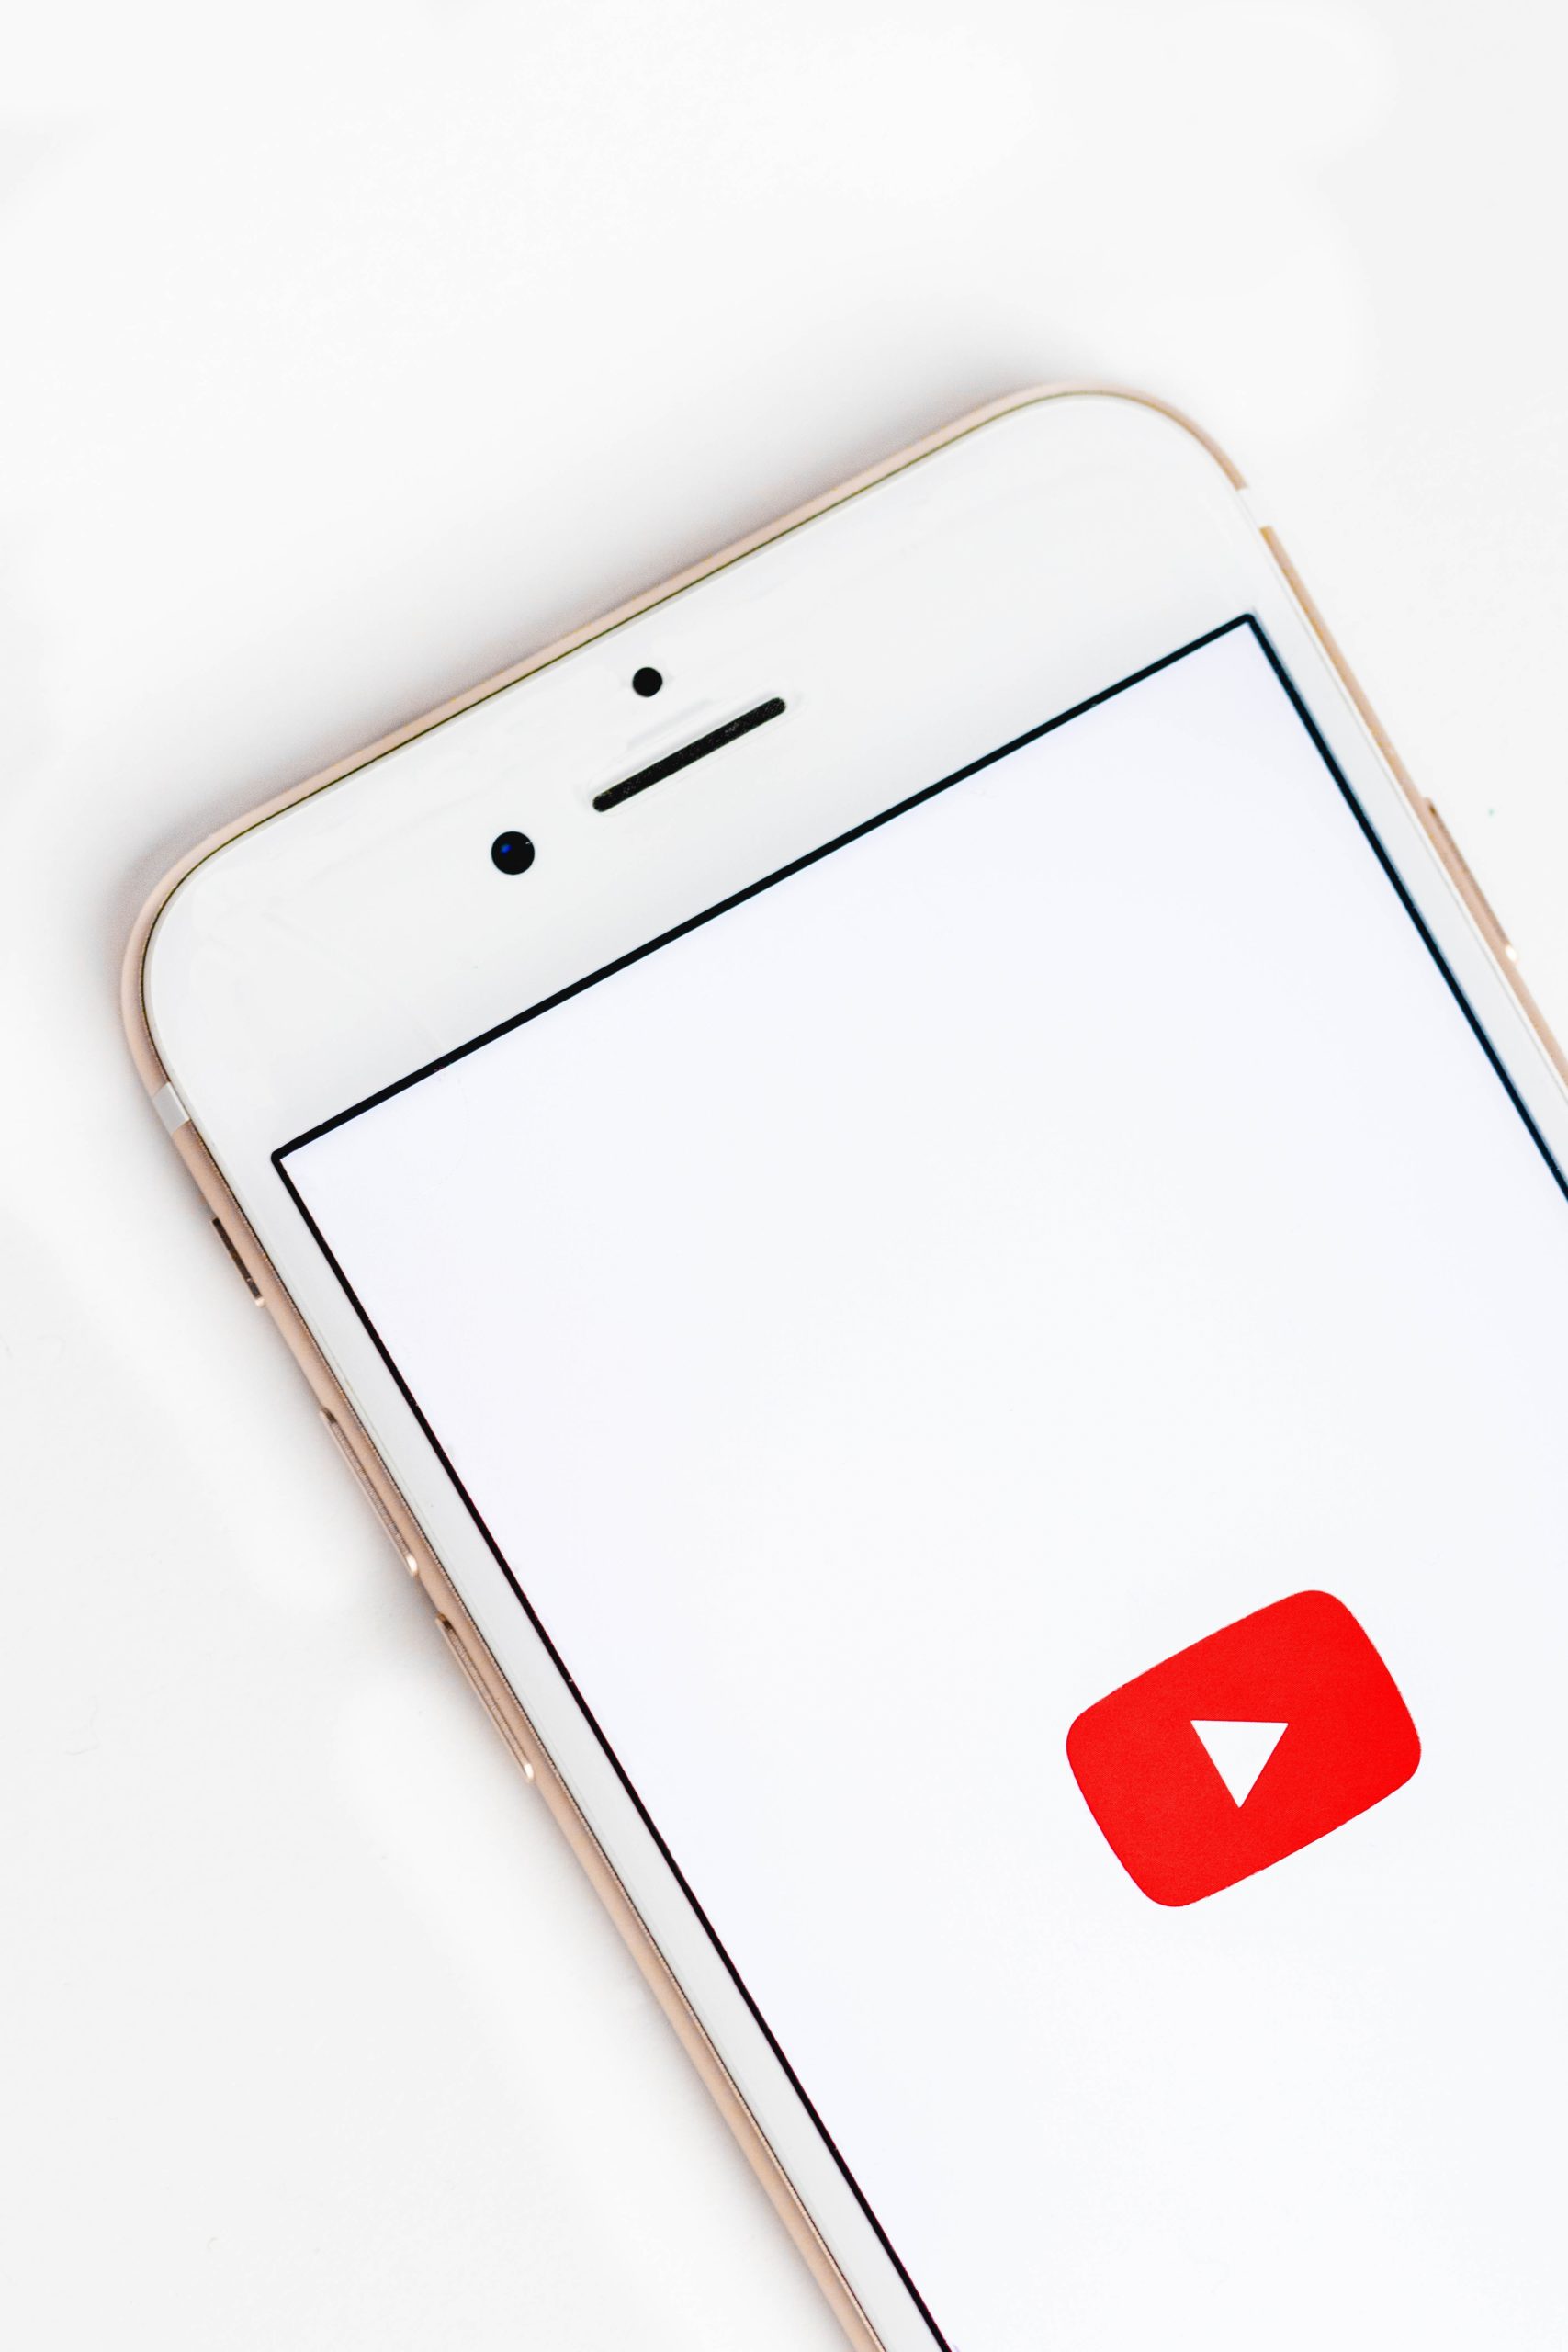 Optimizing your YouTube Channel for SEO